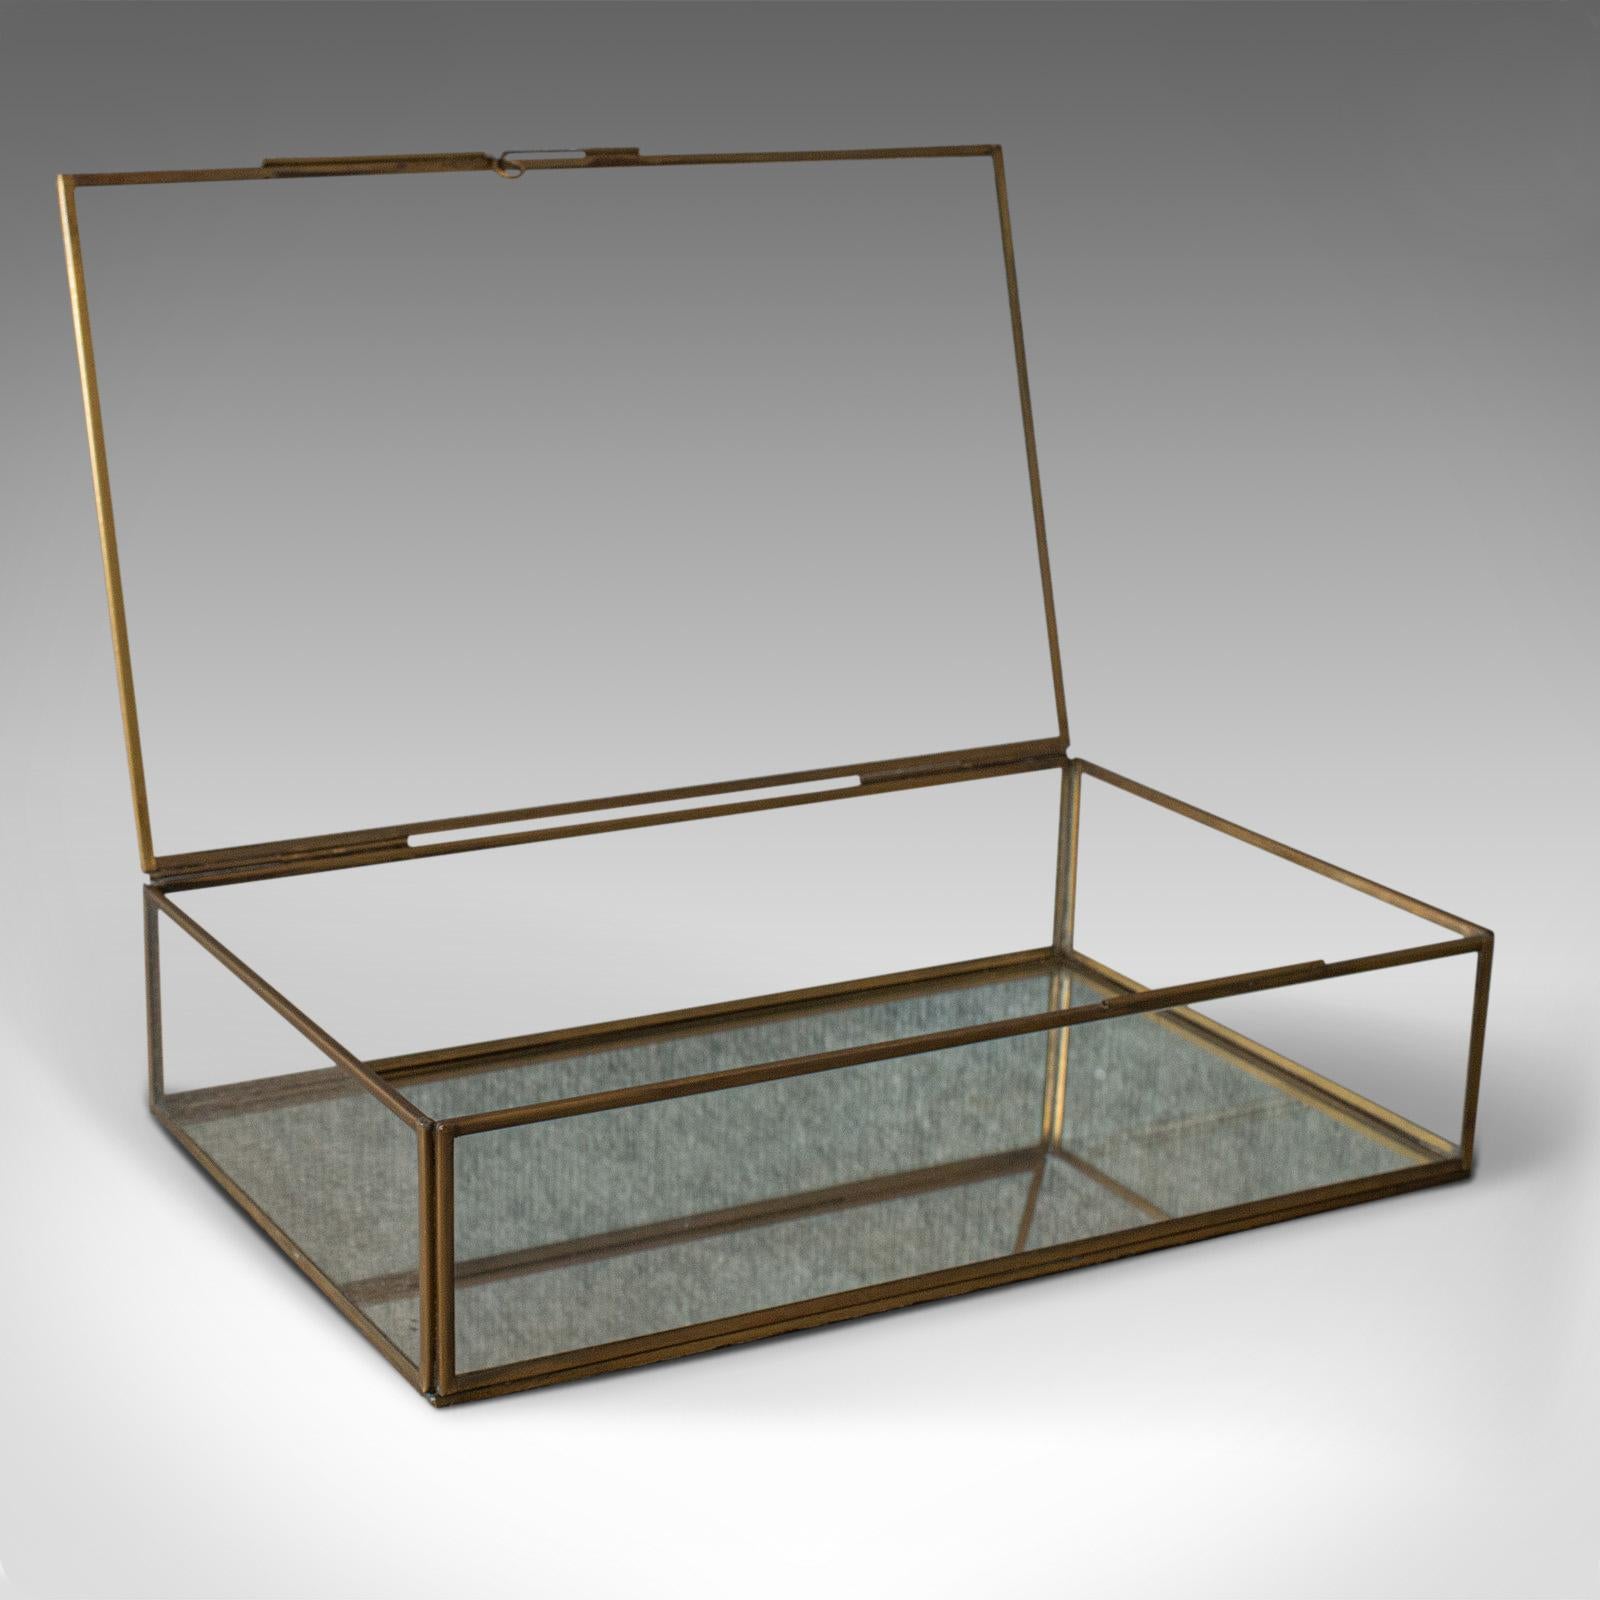 This is a vintage glass display case with mirror bottom. An English, brass showcase, dating to the late 20th century, circa 1980.

Attractive, bright glass showcase
Displays a desirable aged patina
Brass frame shows appealing golden